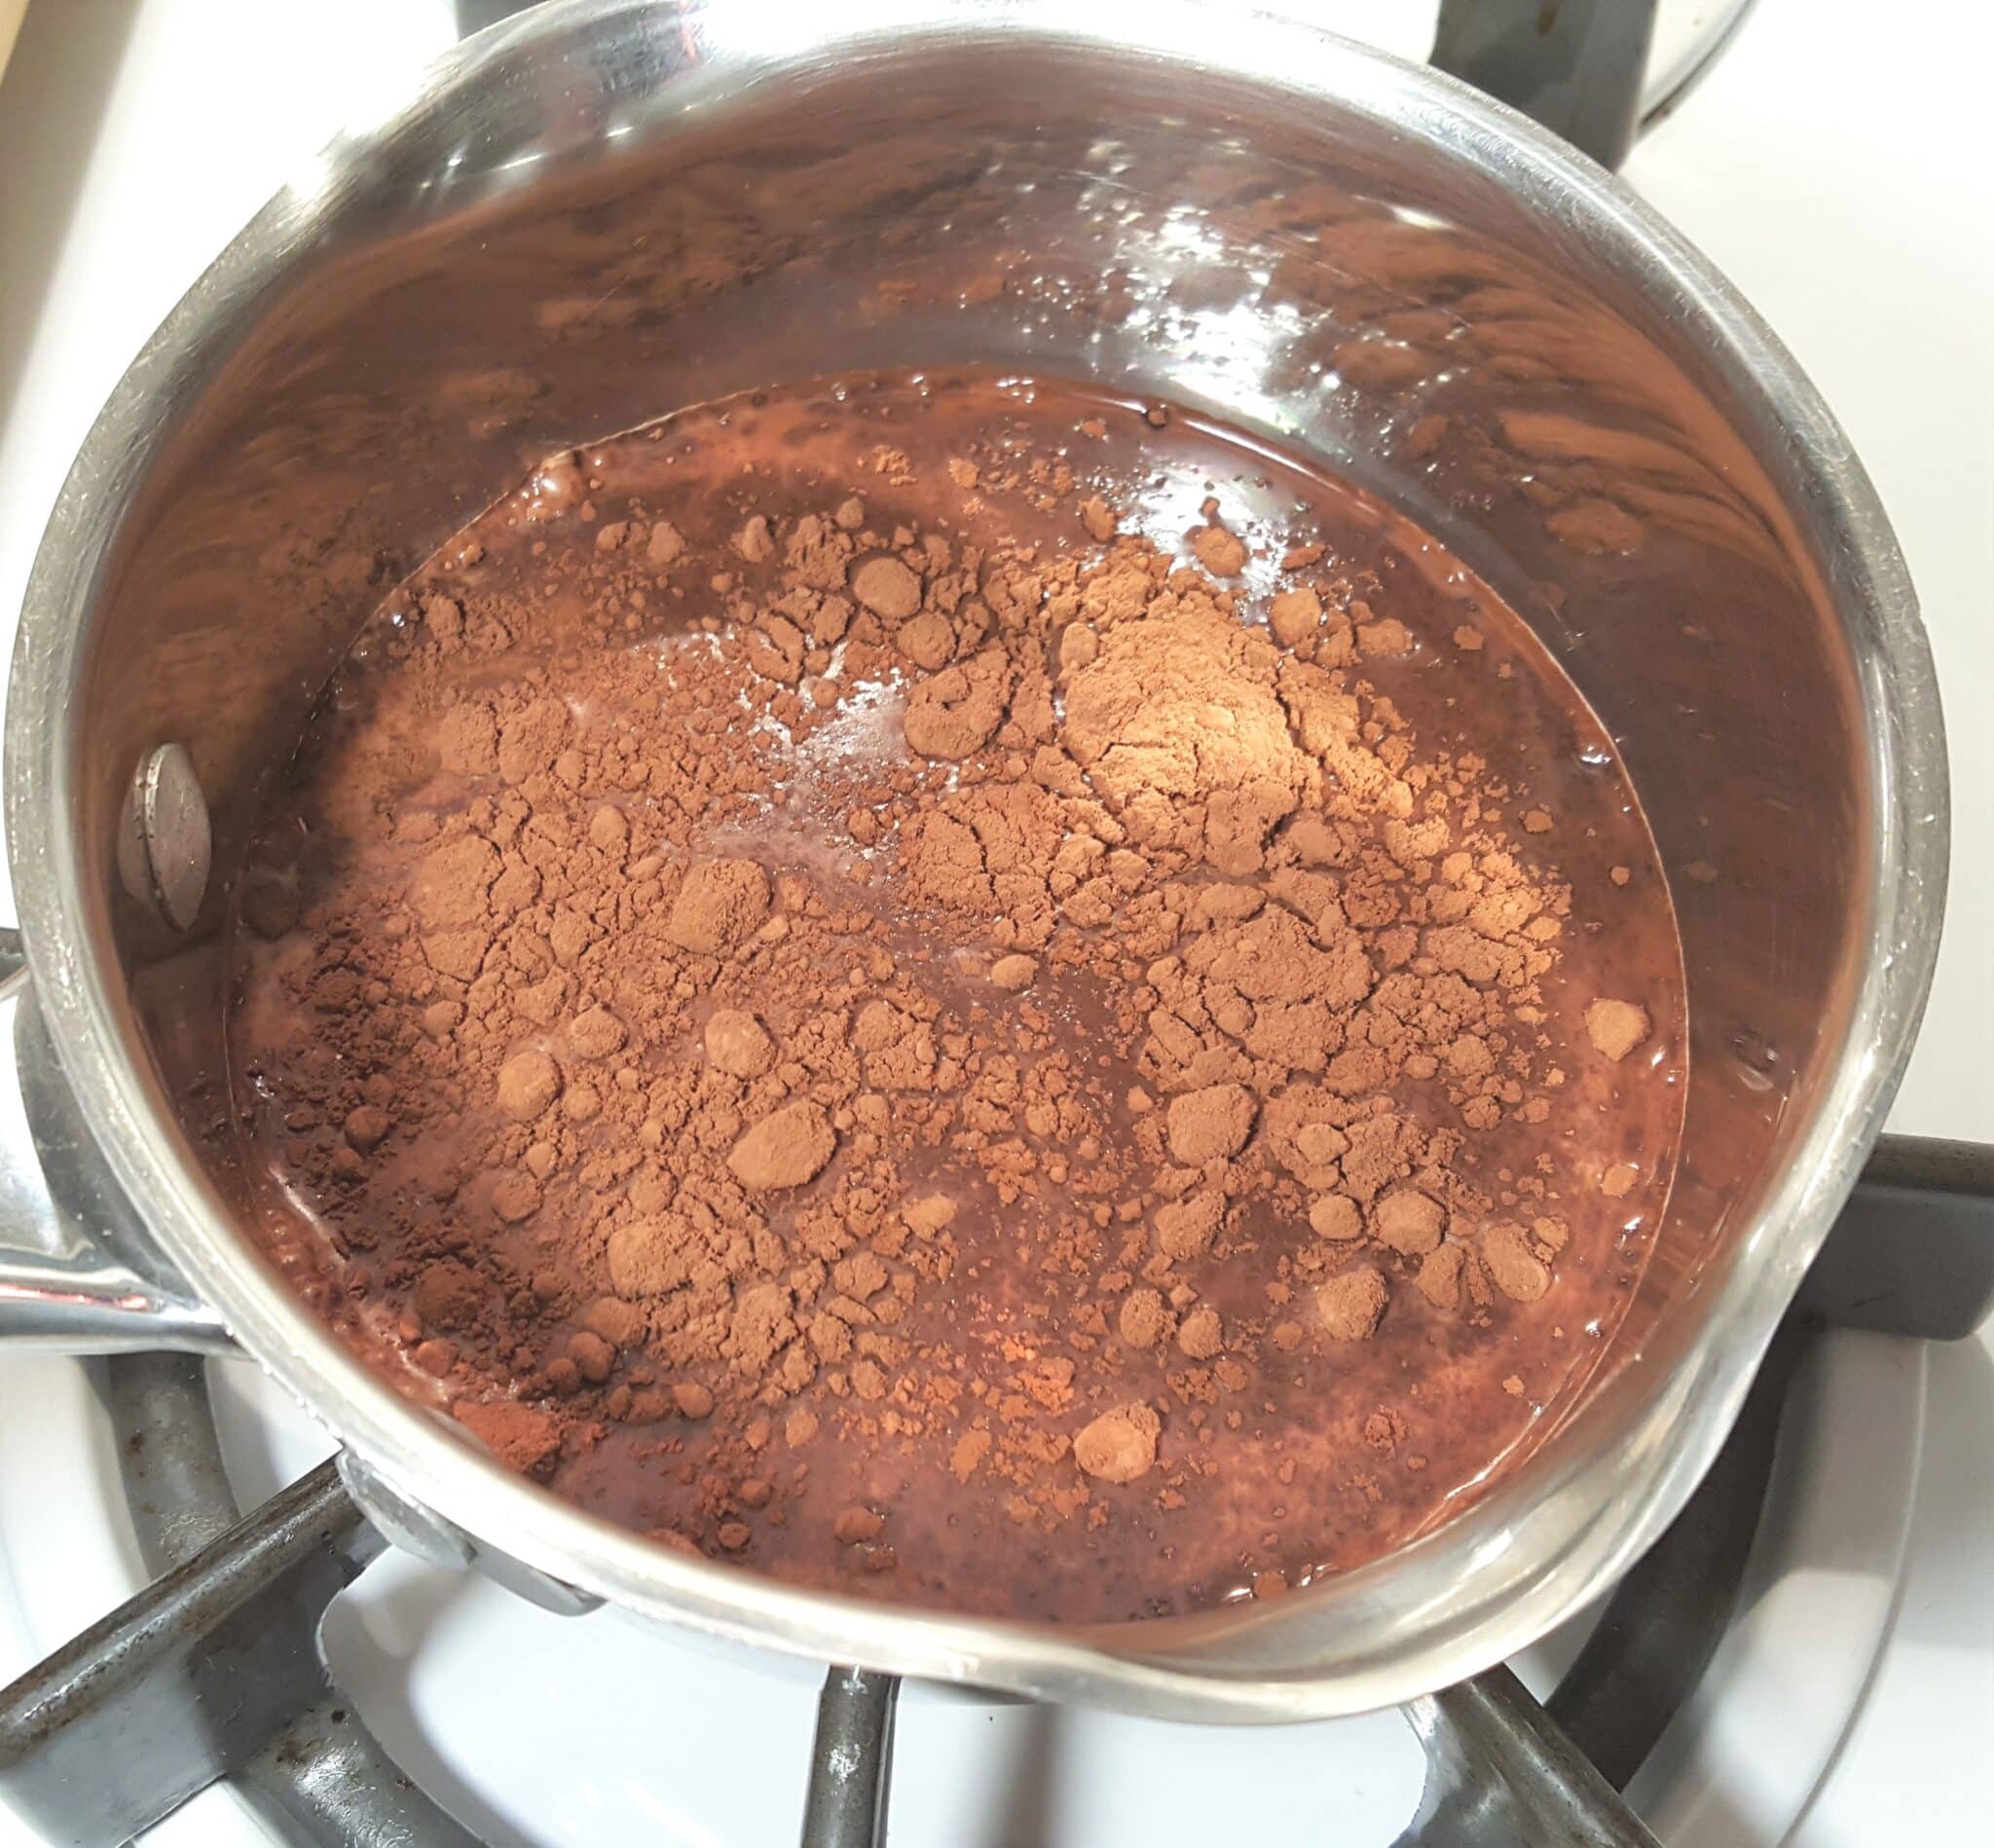 Combine Milk (not all) and Cocoa on Stove